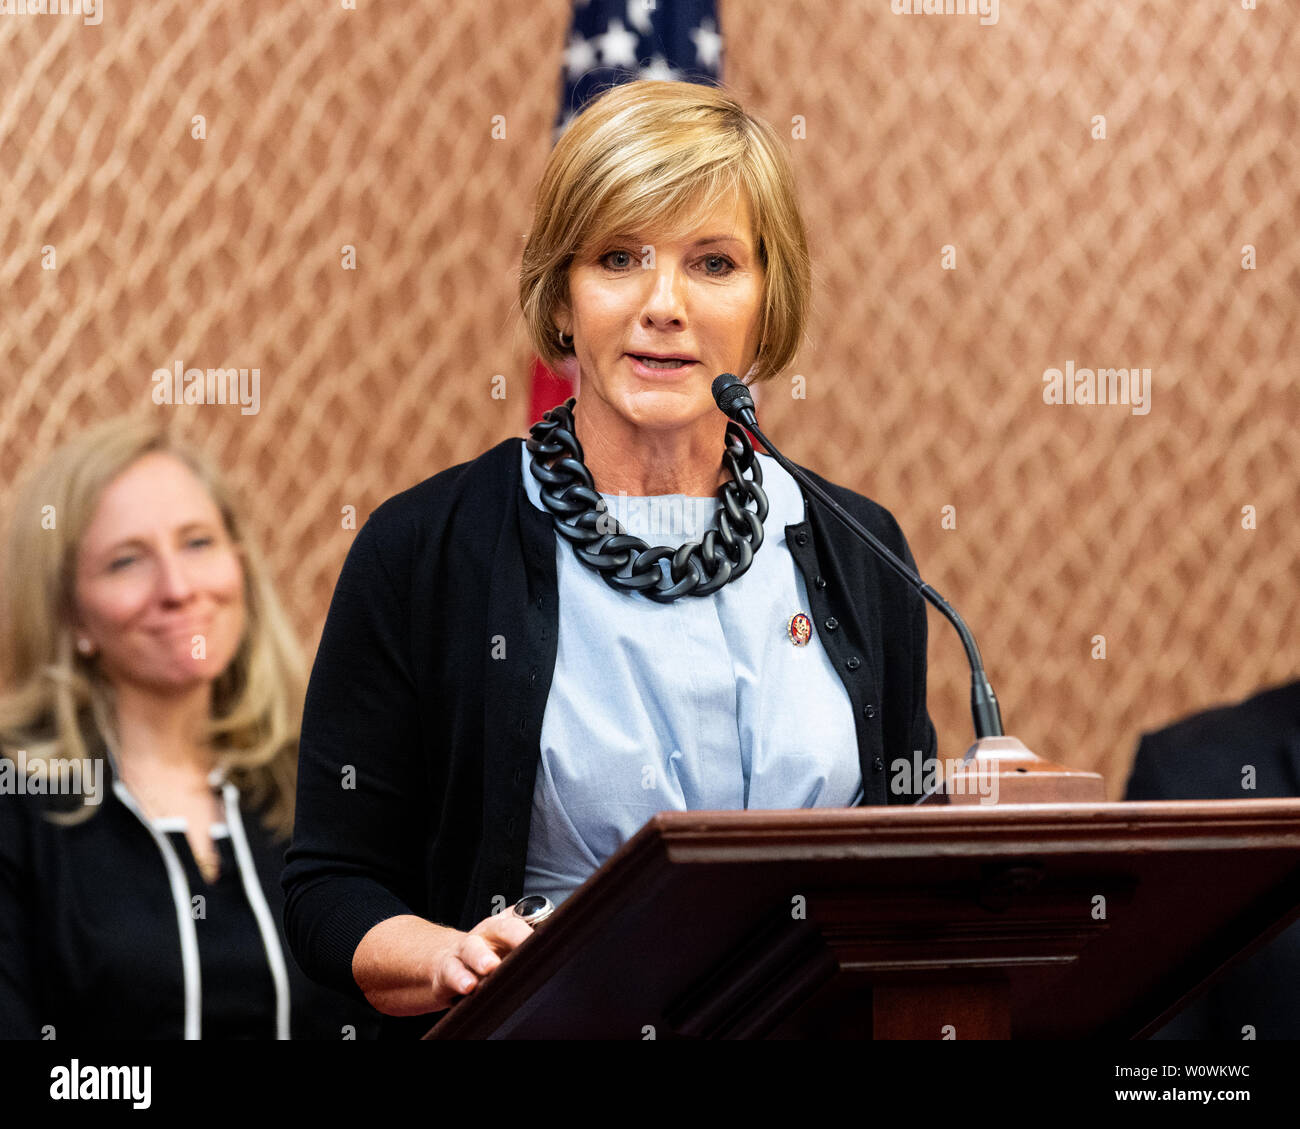 Washington, United States. 27th June, 2019. U.S. Representative Susie Lee (D-NV) speaking at a press conference sponsored by the Problem Solvers Caucus and the Common Sense Coalition to announce 'principles for legislation to lower prescription drug prices' at the US Capitol in Washington, DC. Credit: SOPA Images Limited/Alamy Live News Stock Photo